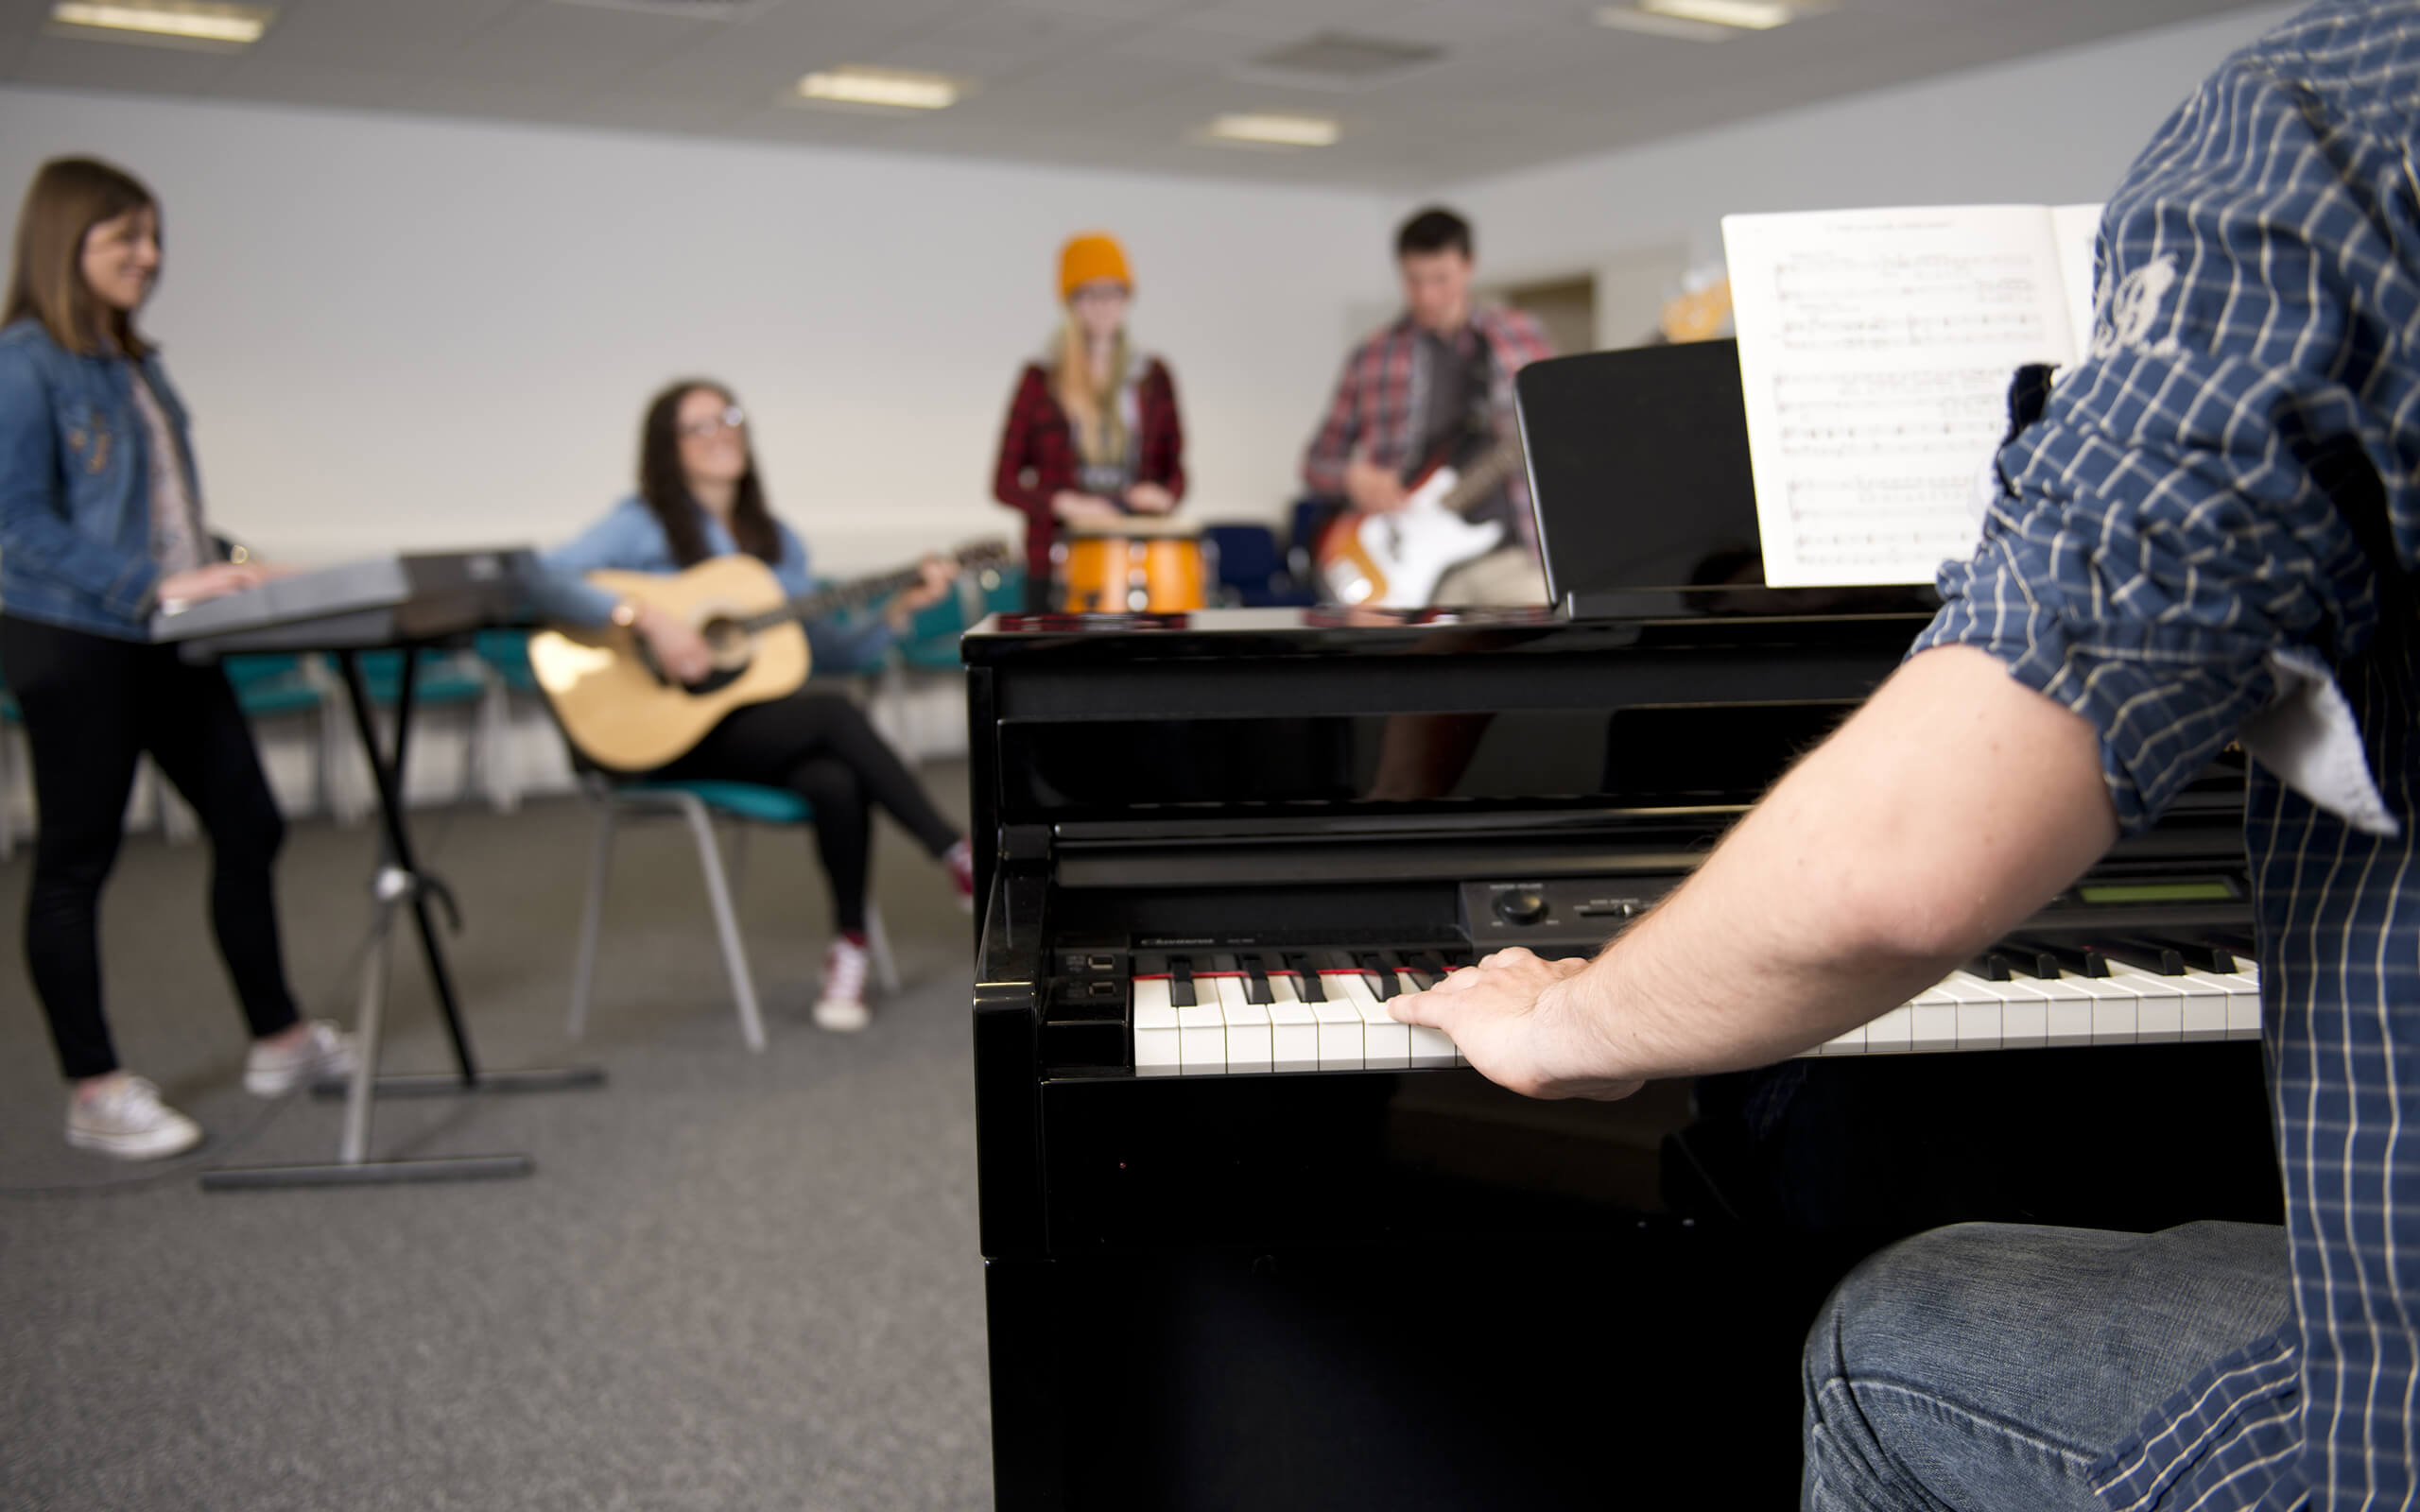 MA Music Song Writing Industries Class | London Campus at UWS | University of the West of Scotland